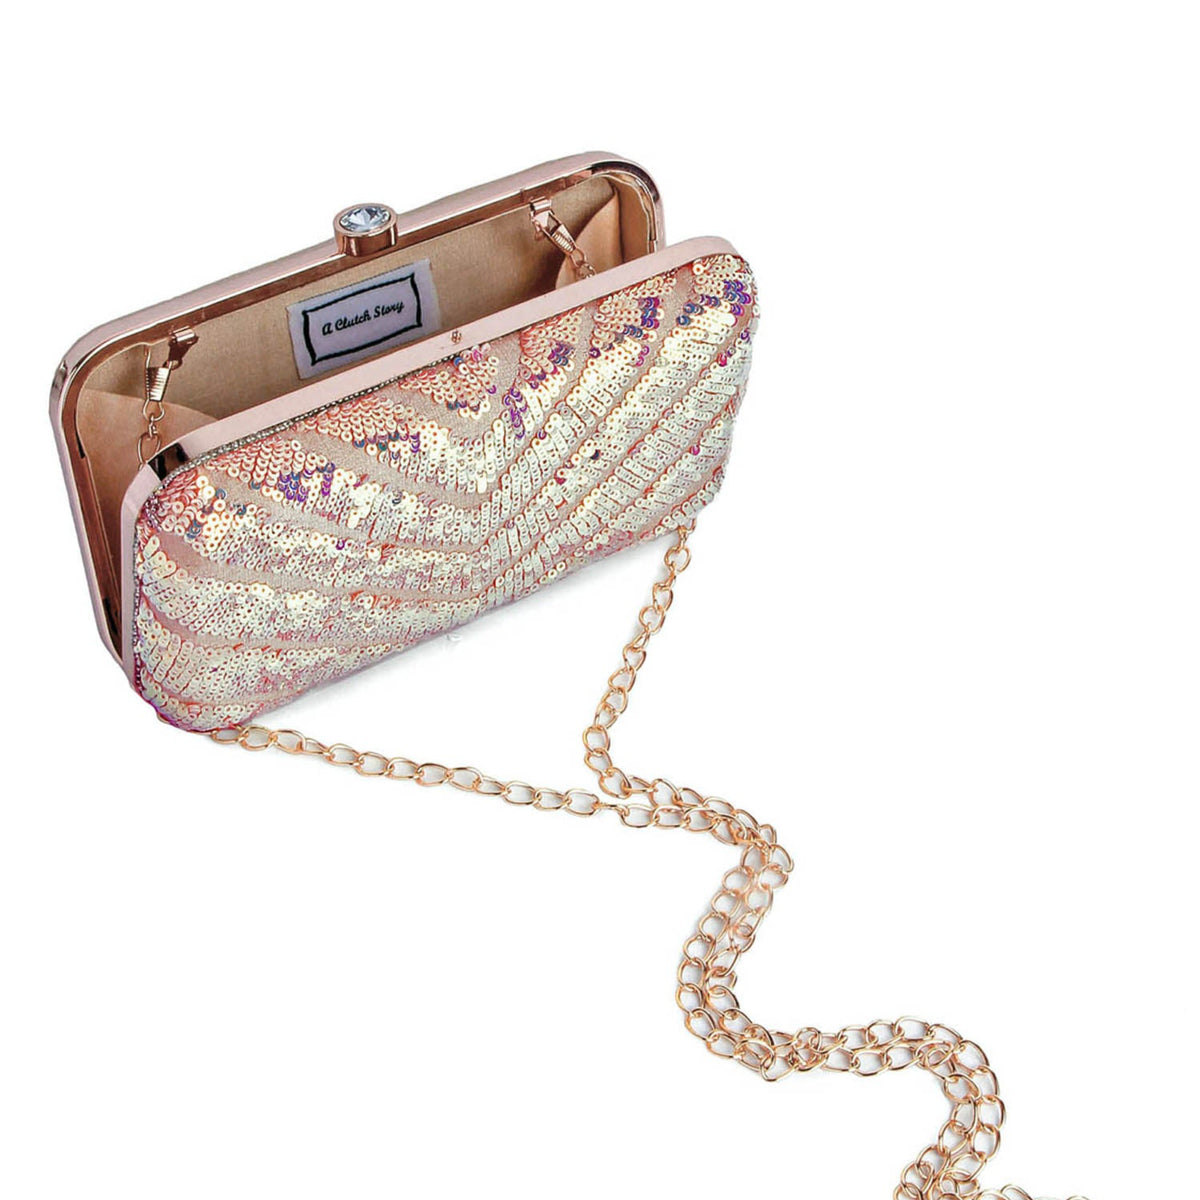 Radiant shimmer handembroidered clutch